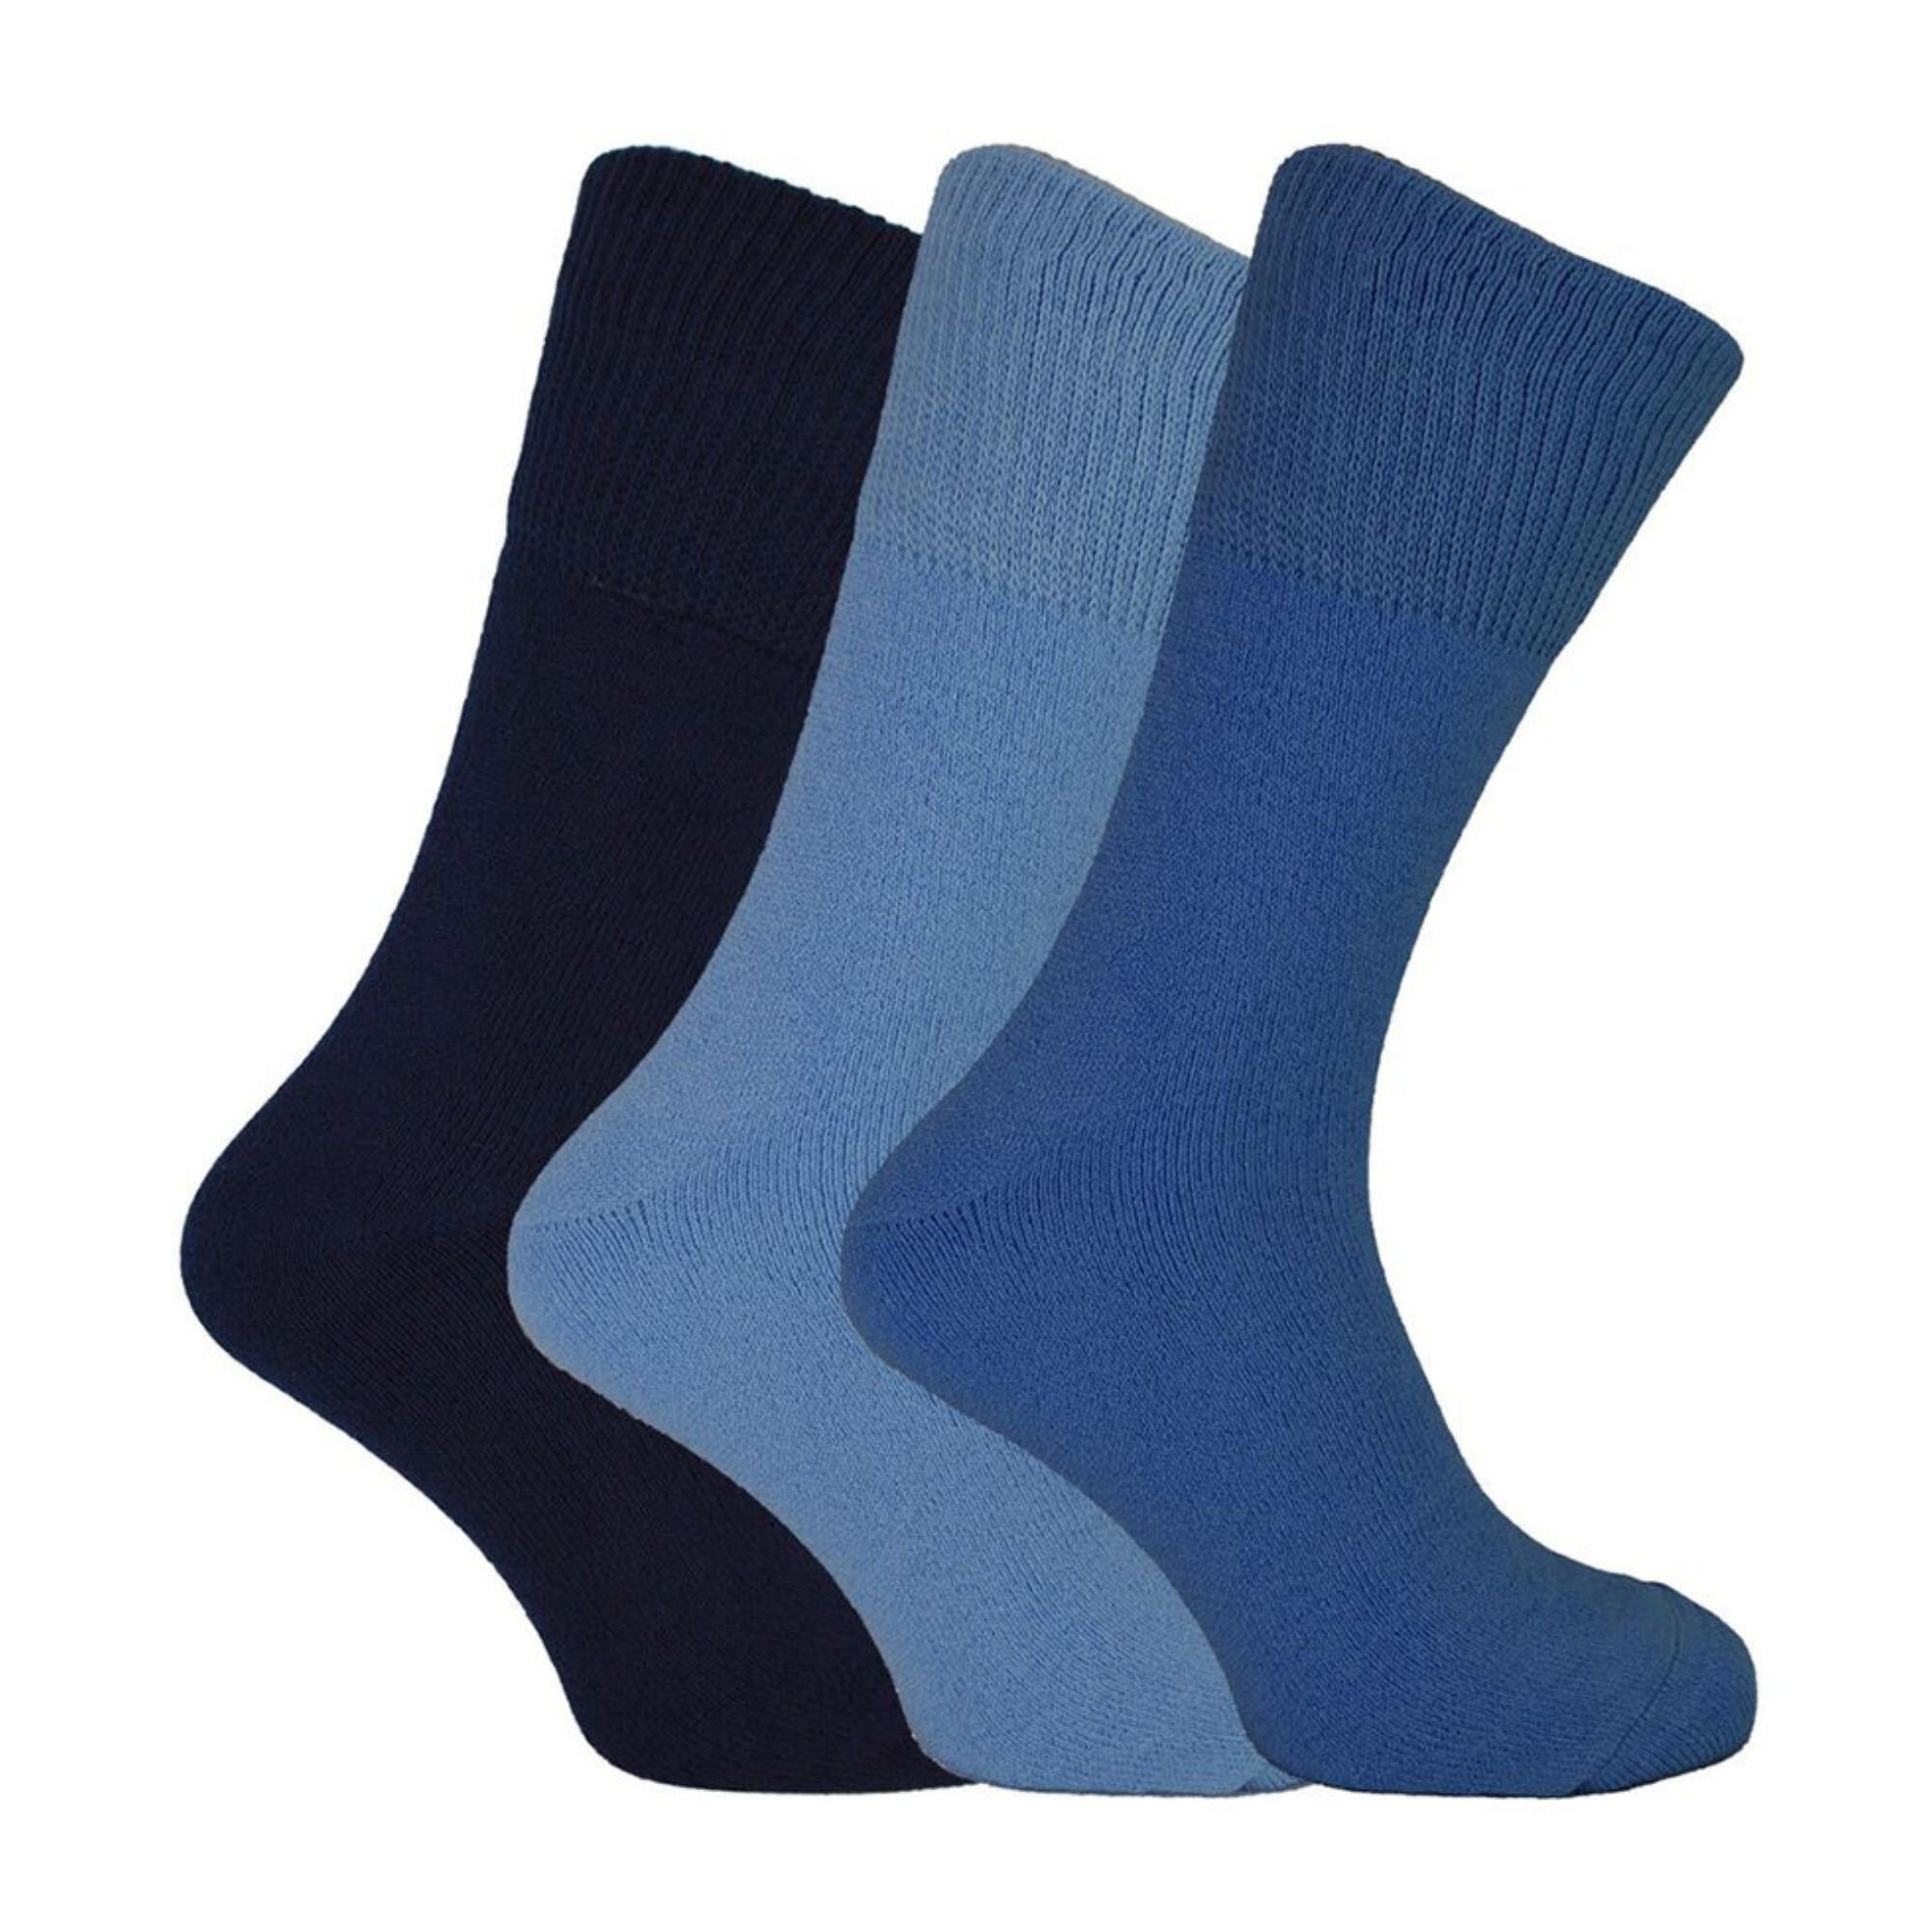 Bamboo Thermal Socks for Winter | Mens & Ladies Sizes | Thick Socks 1/7